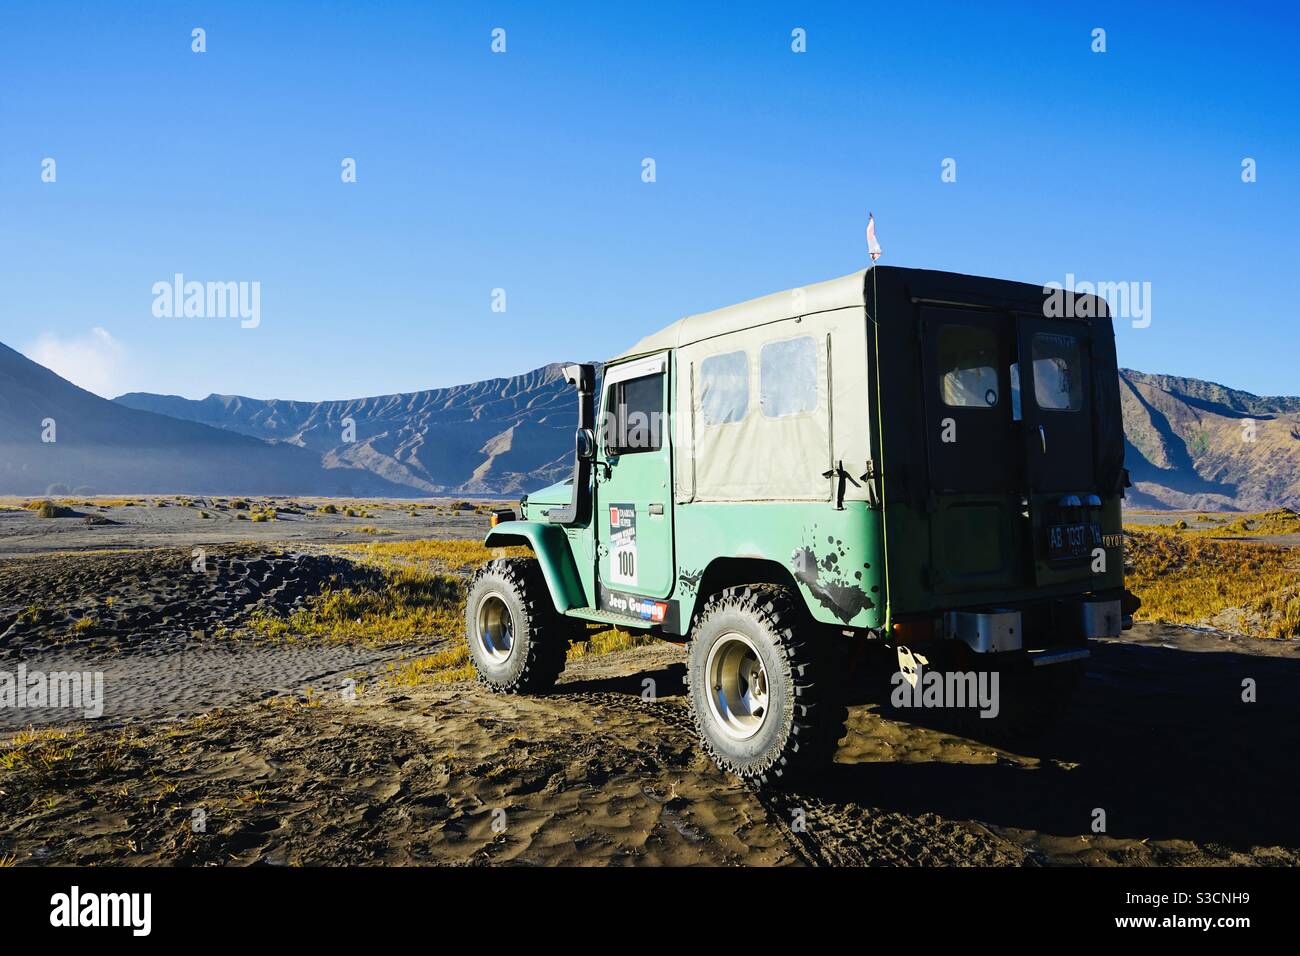 1980s short wheel base land cruiser for exploring the sea of sand in the Tengger Caldera at Mount Bromo East Java Indonesia Stock Photo